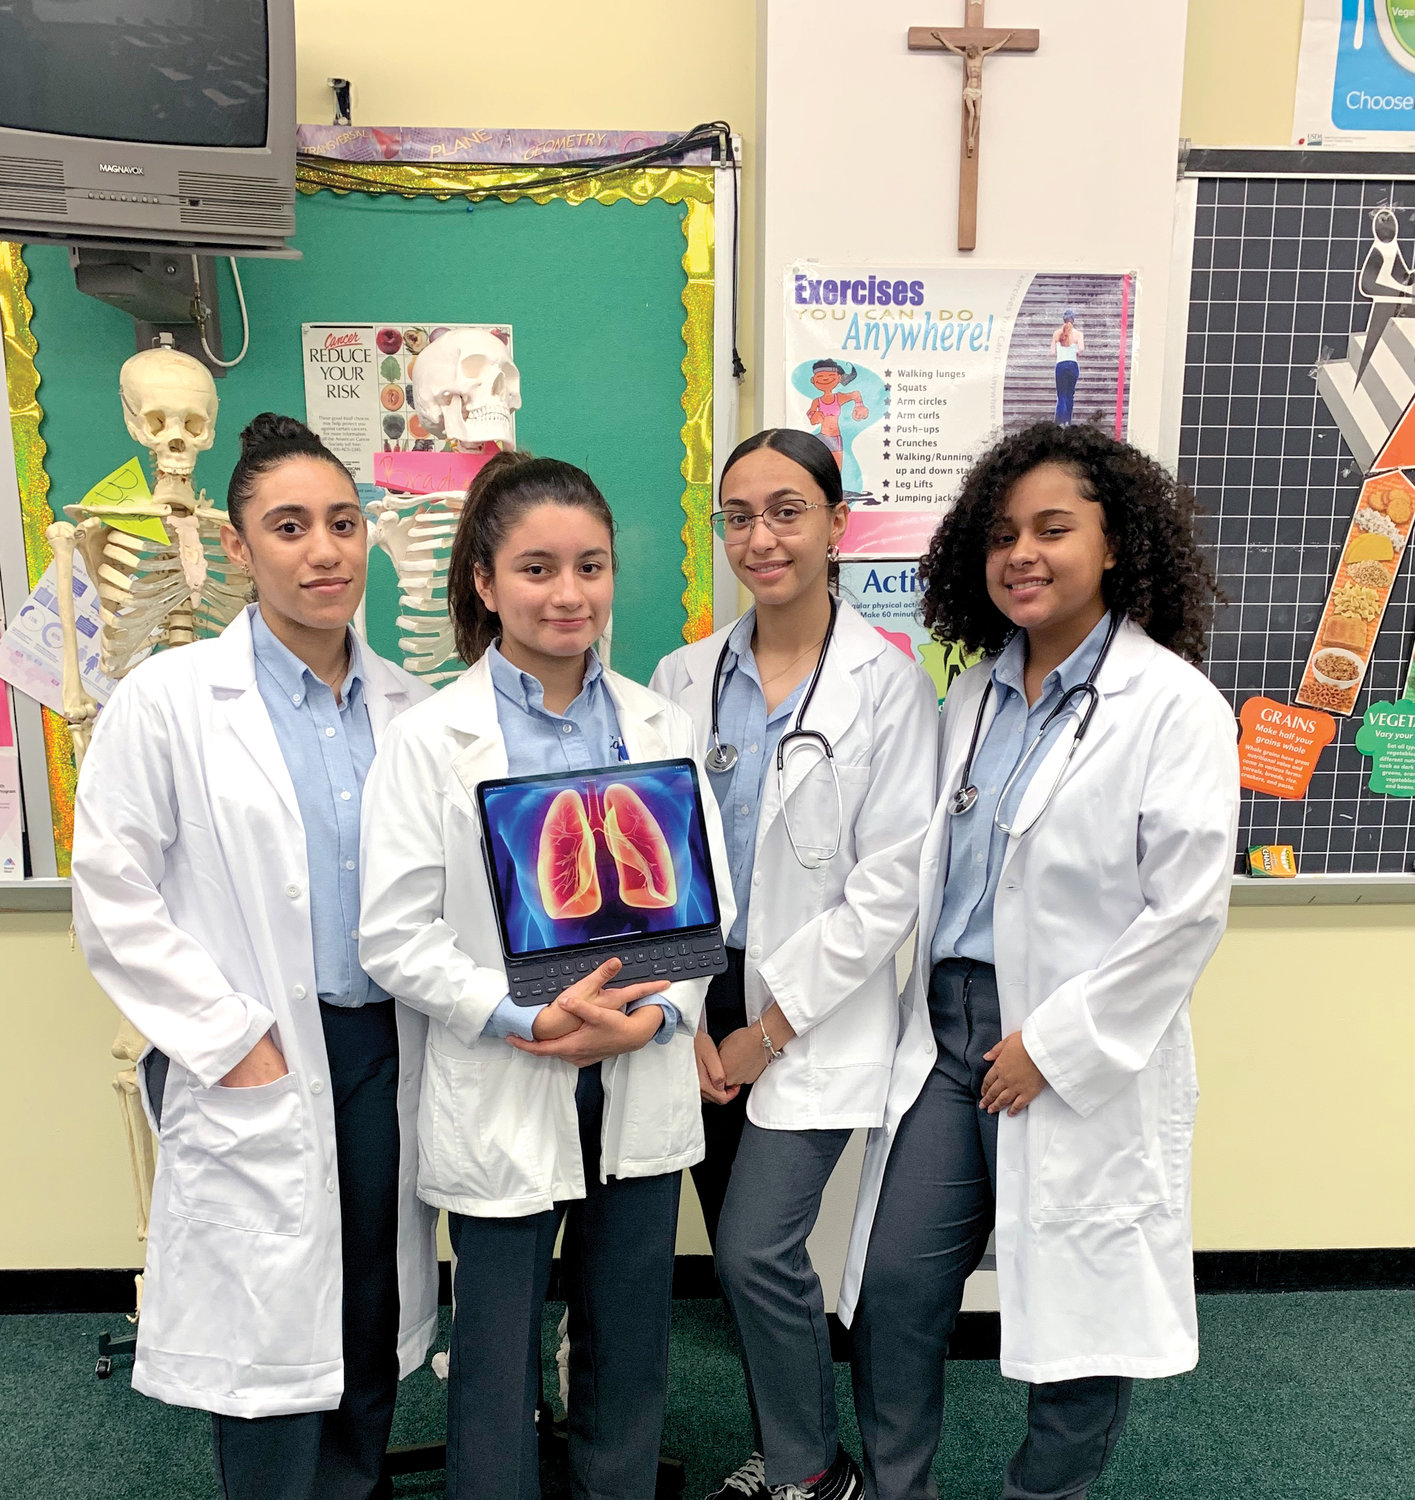 ENRICHMENT PROGRAM—The four juniors from Cathedral High School in Manhattan participating in an internship at Memorial Sloan Kettering Cancer Center in Manhattan are, from left, Skyla Collado, Annette Malan, Taiana Corchado and Thais Peña.